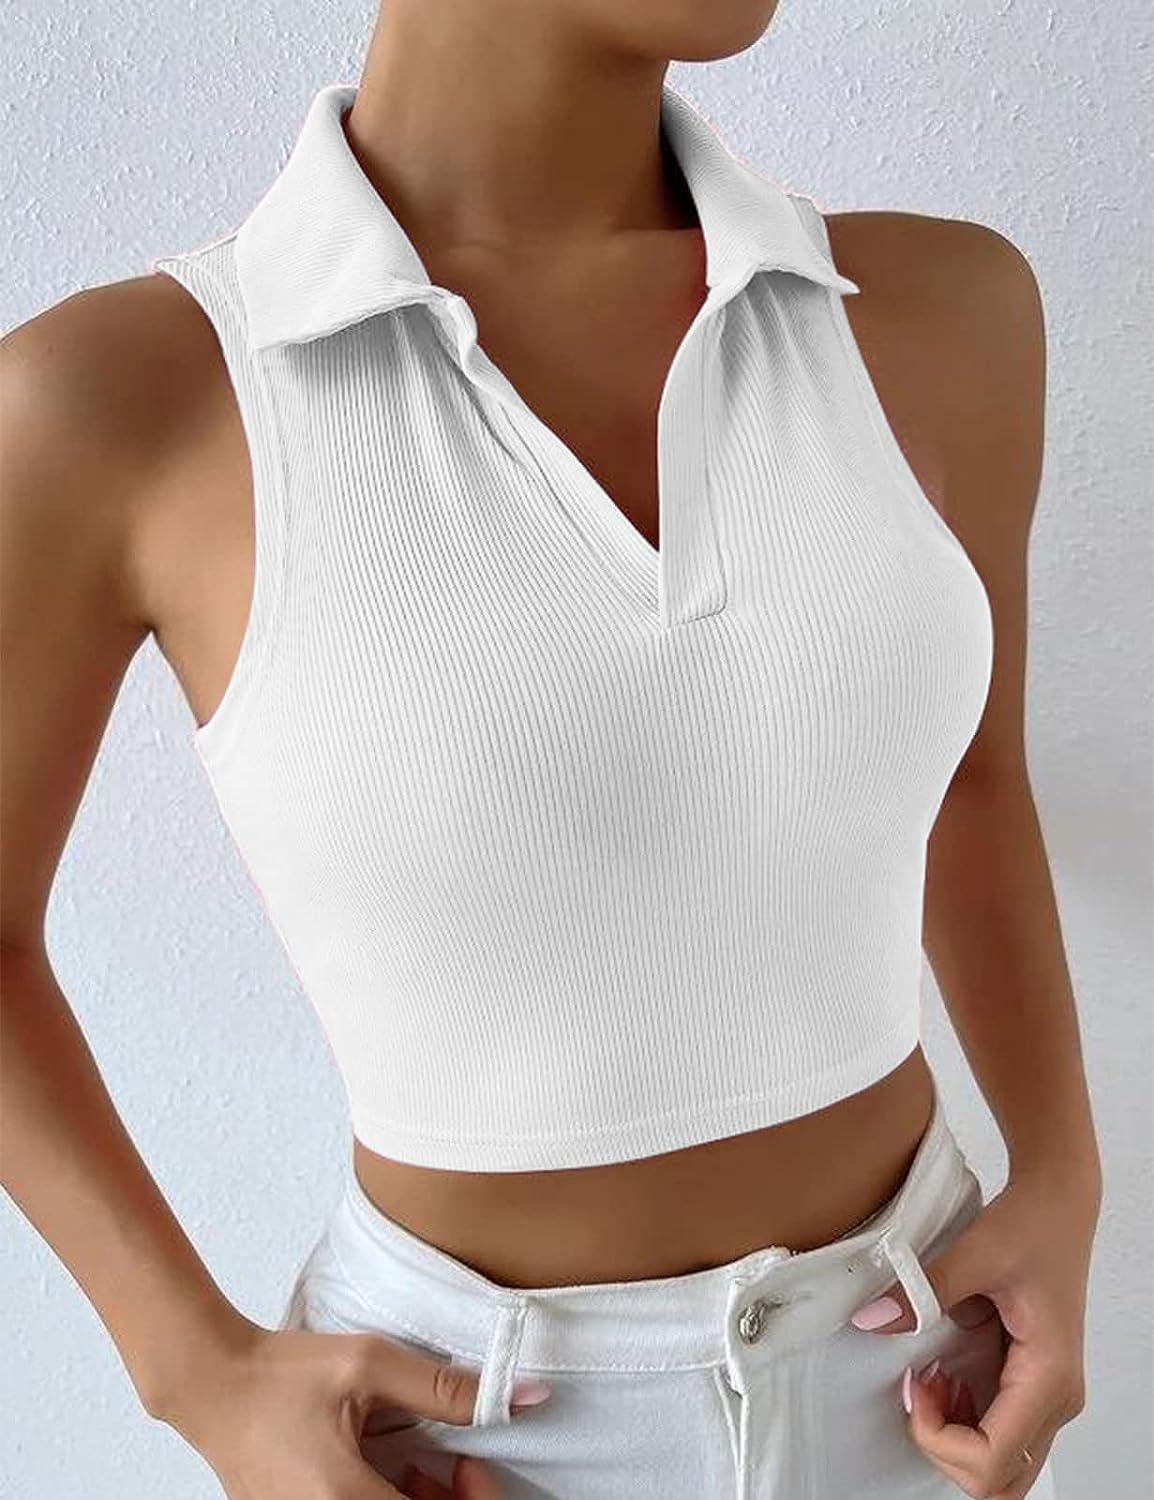 Women Workout Crop Top Built in Bra Ribbed Athletic Tank Tops Casual  Sleeveless Collar Shirts Padded Sports Yoga Vest White Small